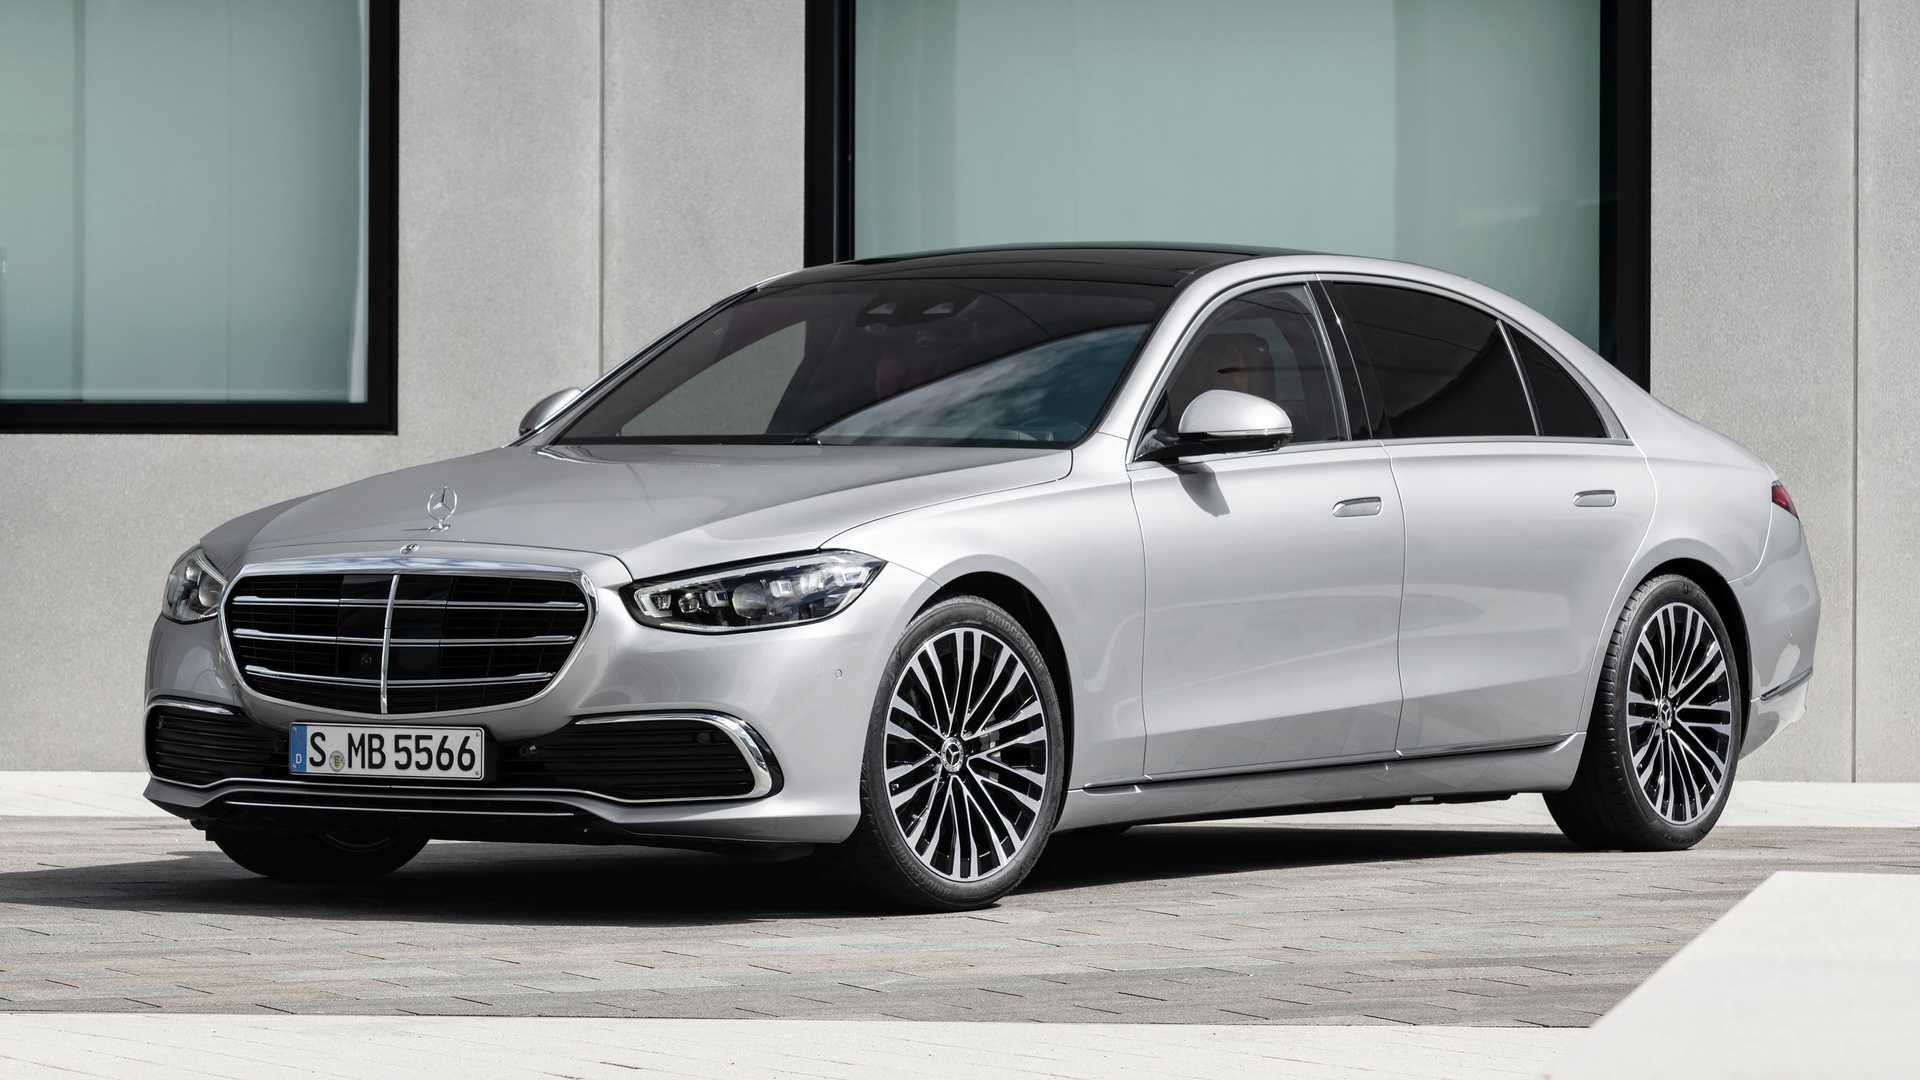 Mercedes S Class Revealed: Iconic Looks, Modern Tech, More Power